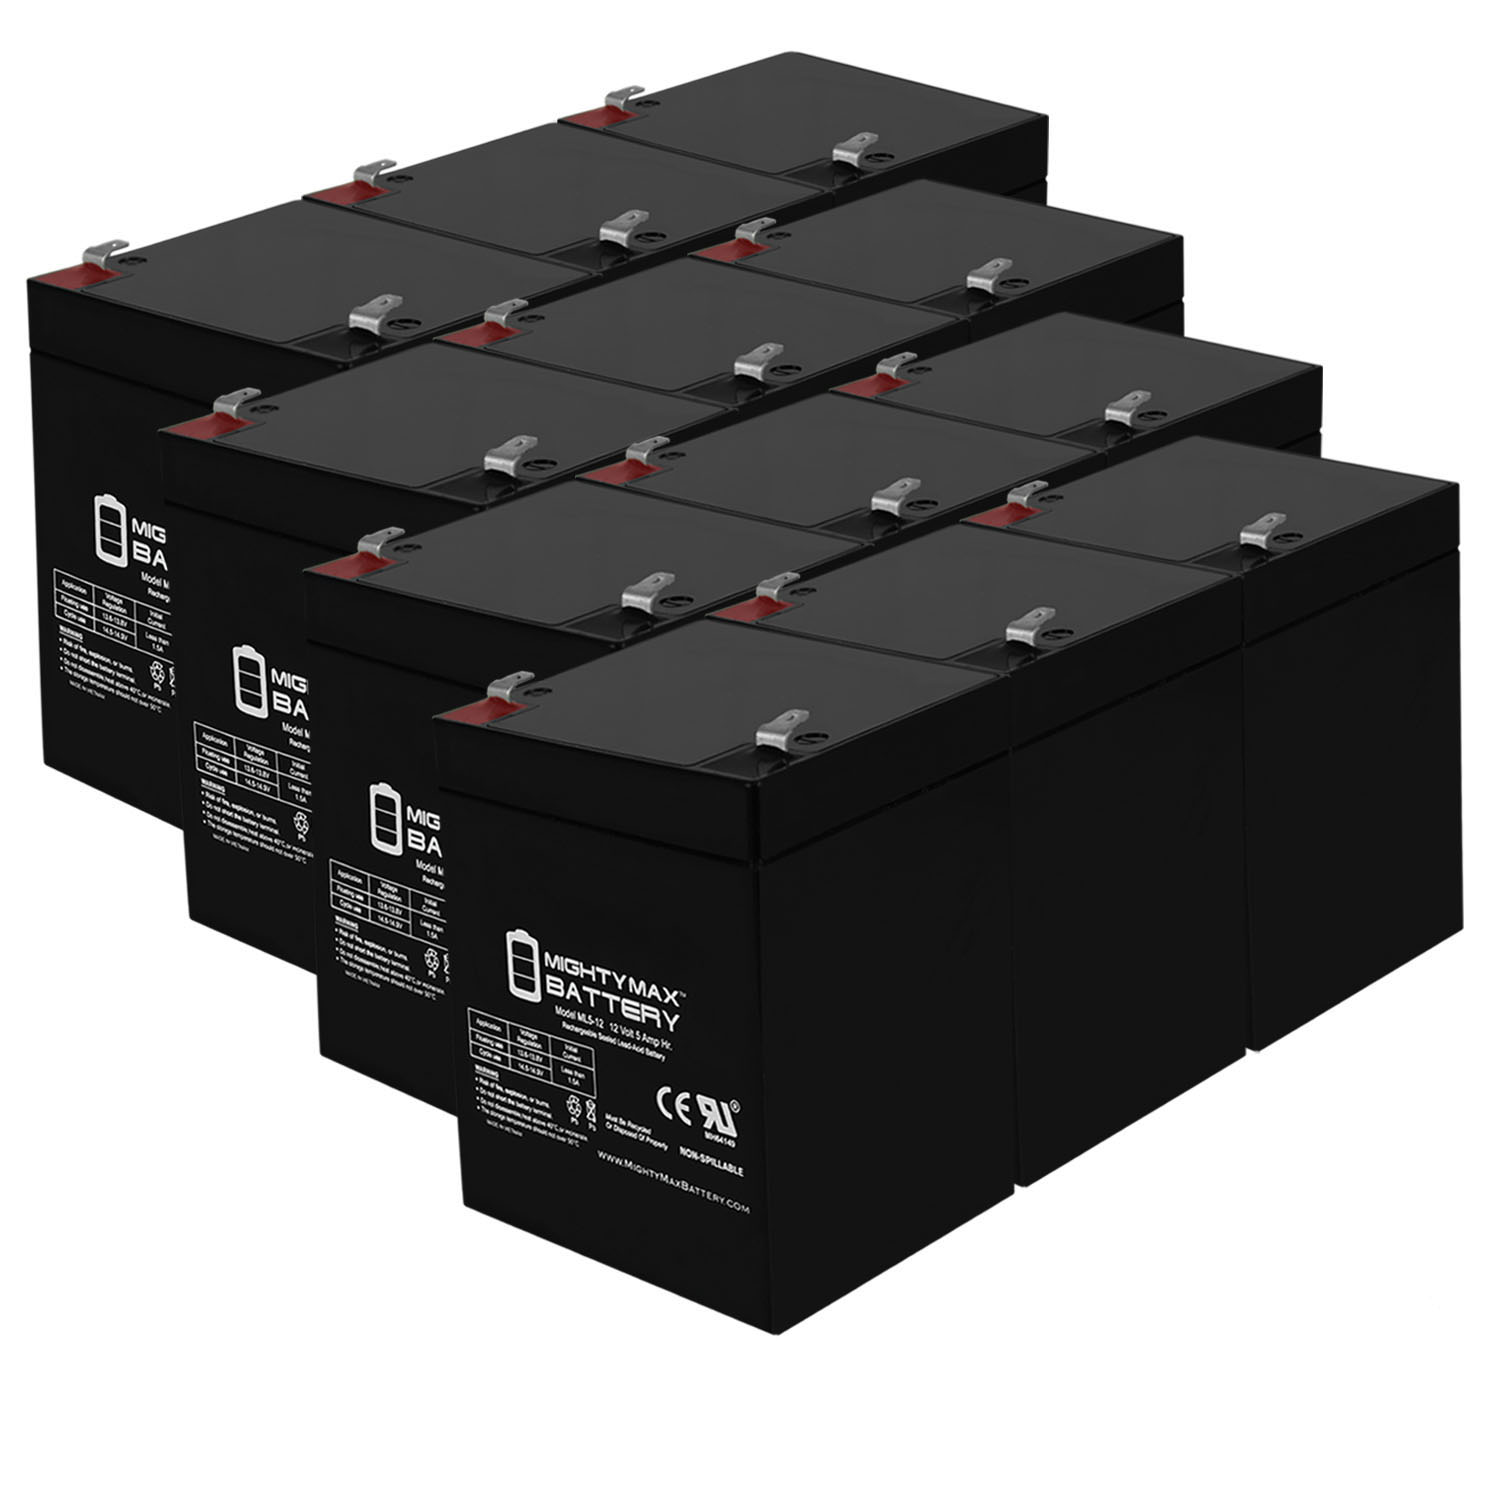 12V 5AH SLA Replacement Battery for Emad Skateboards Pavement PP150 - 12 Pack